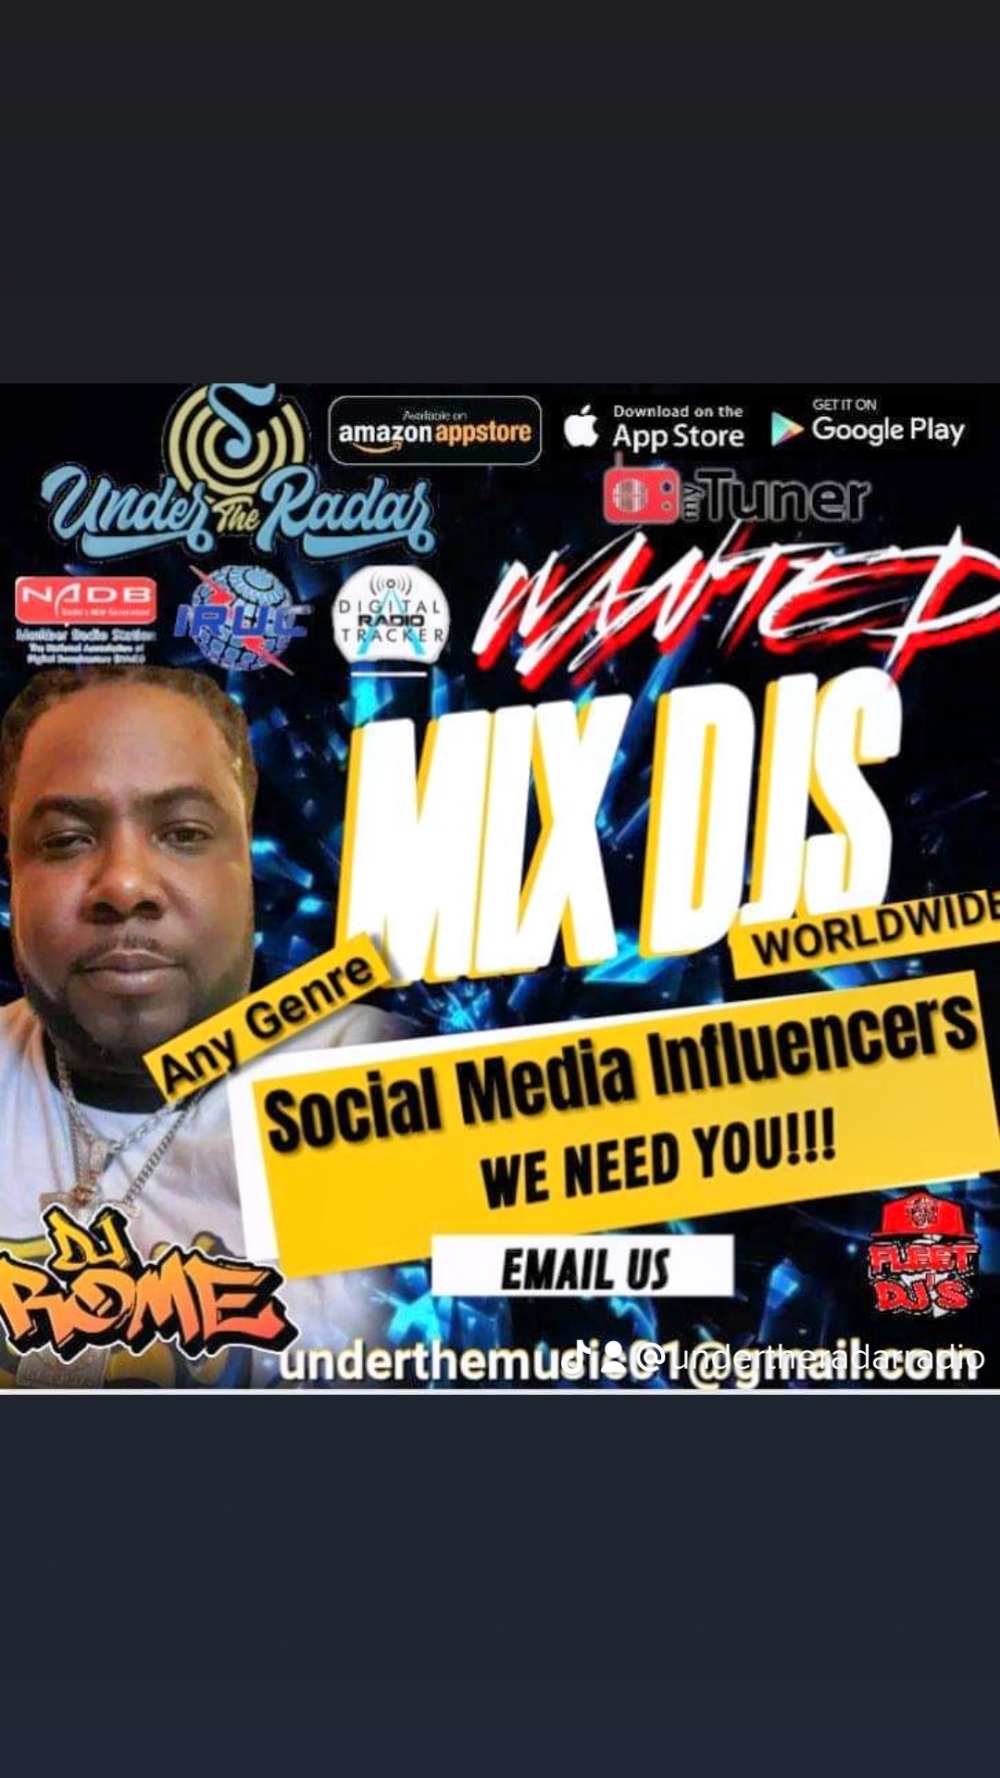 Looking For DJs And Social Media Influencers